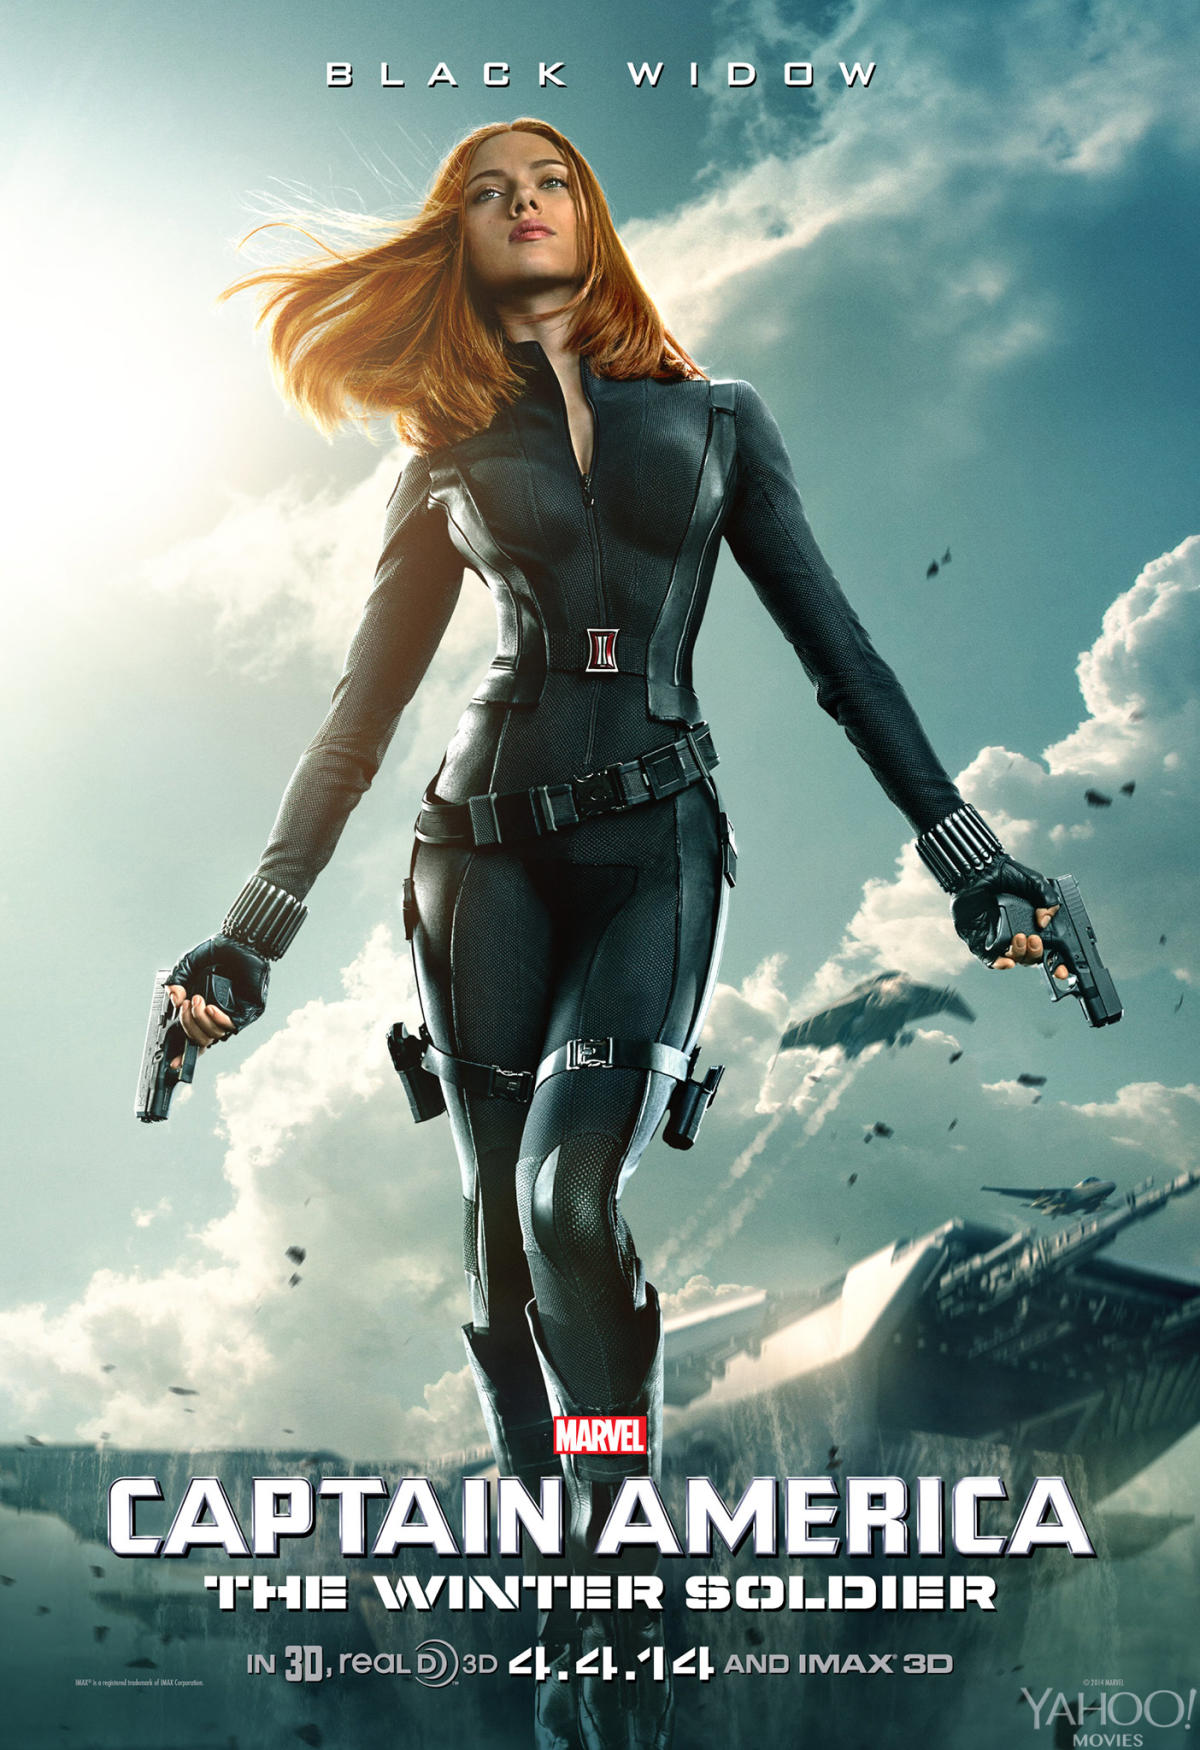 How Marvel Finally Gave Black Widow Her Own Story